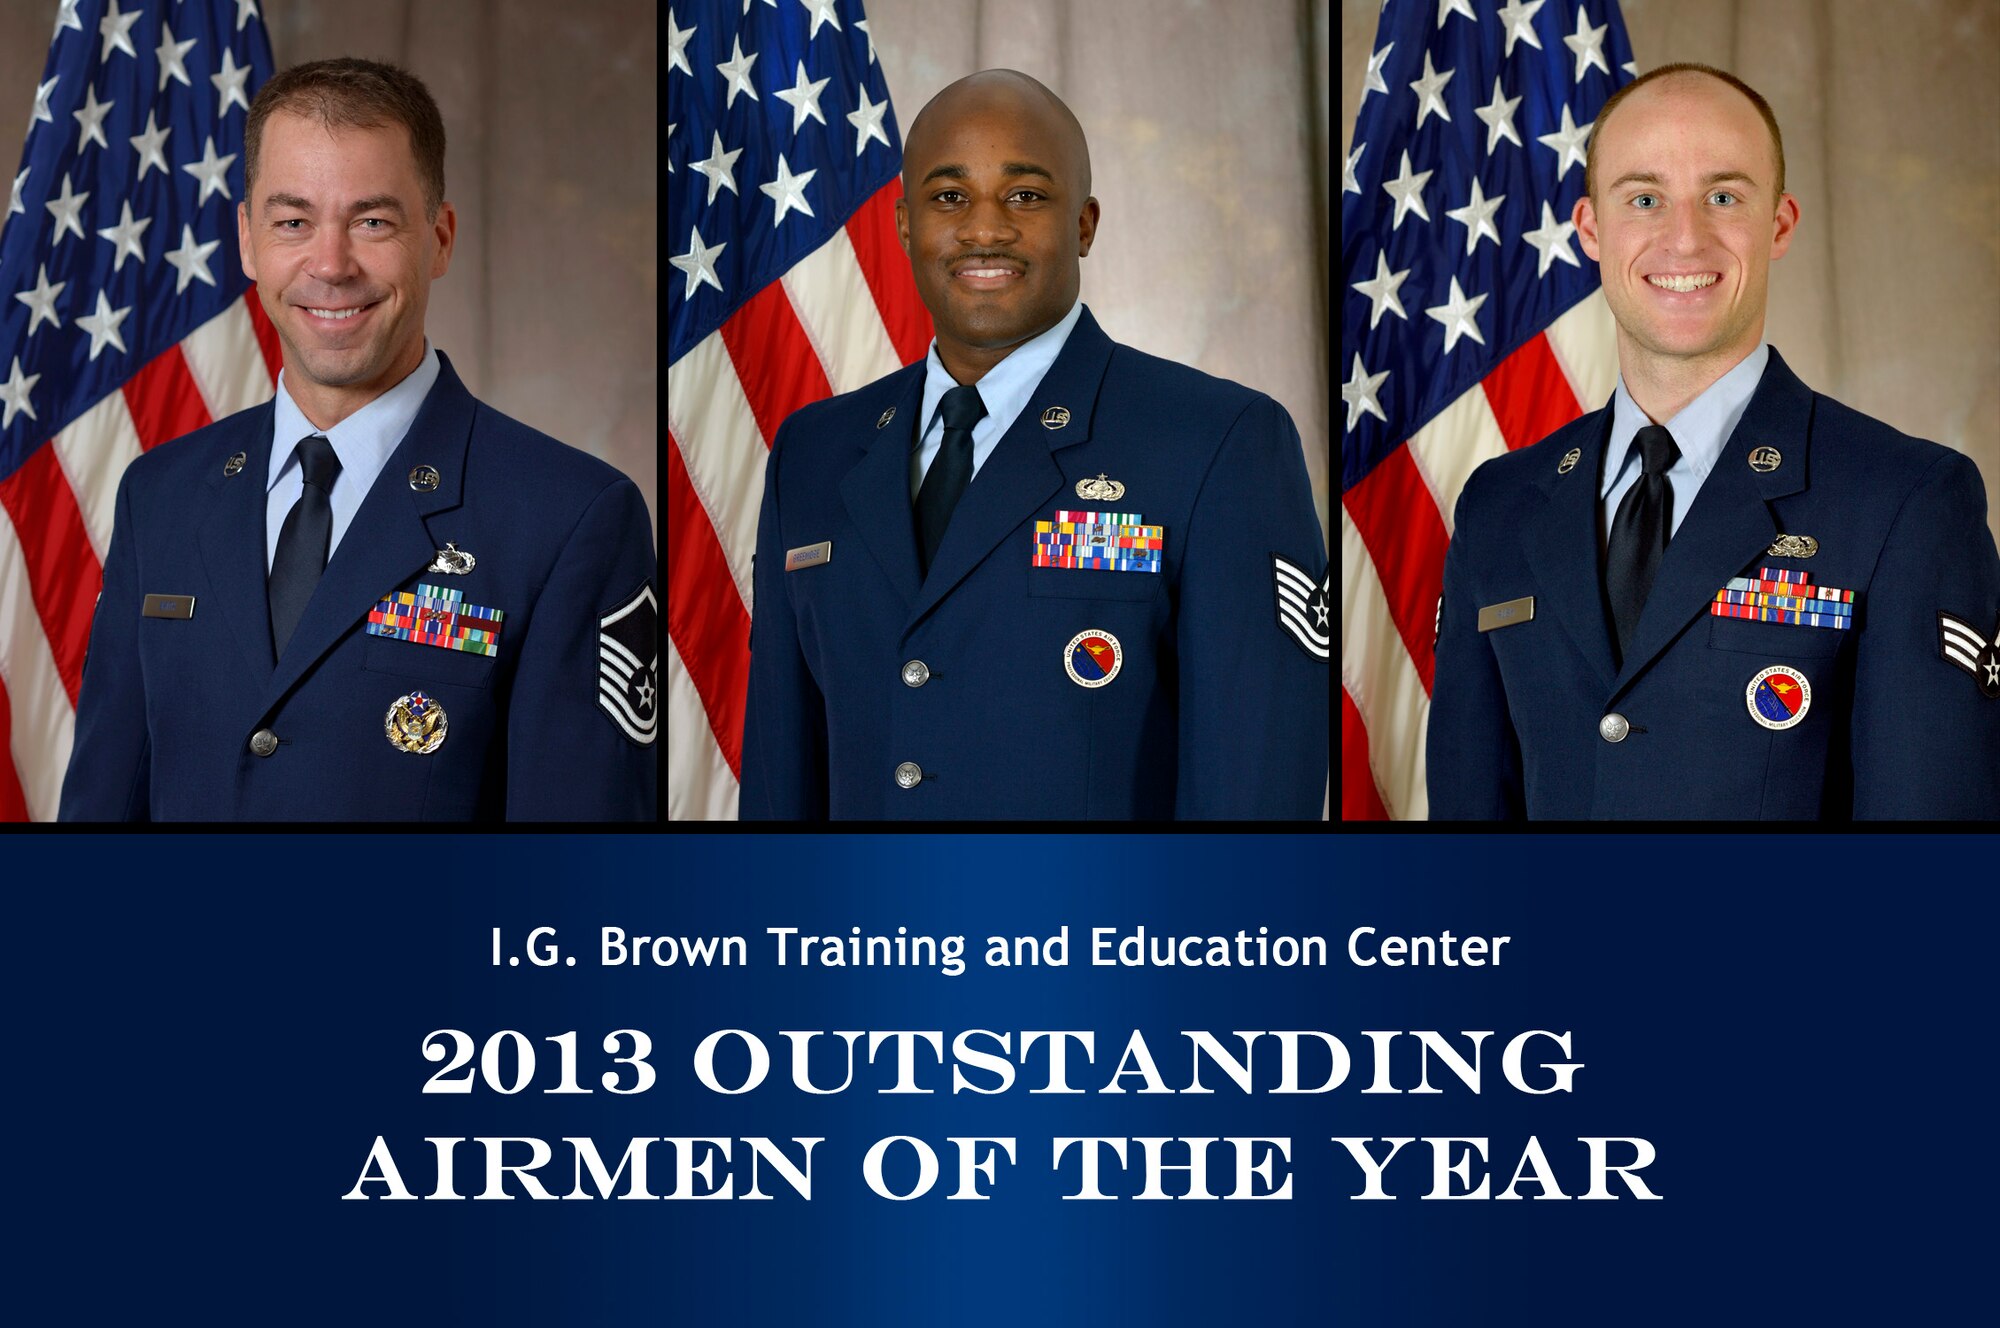 MCGHEE TYSON AIR NATIONAL GUARD BASE, Tenn.  - From left, Master Sgt. Mike R. Smith, Tech. Sgt. Kasimu "Moe" Greenidge and Senior Airman Aaron L. Rush; the I.G. Brown Training and Education Center's 2013 Outstanding Airmen of the Year. (U.S. Air National Guard photo illustration by Master Sgt. Kurt Skoglund/Released)